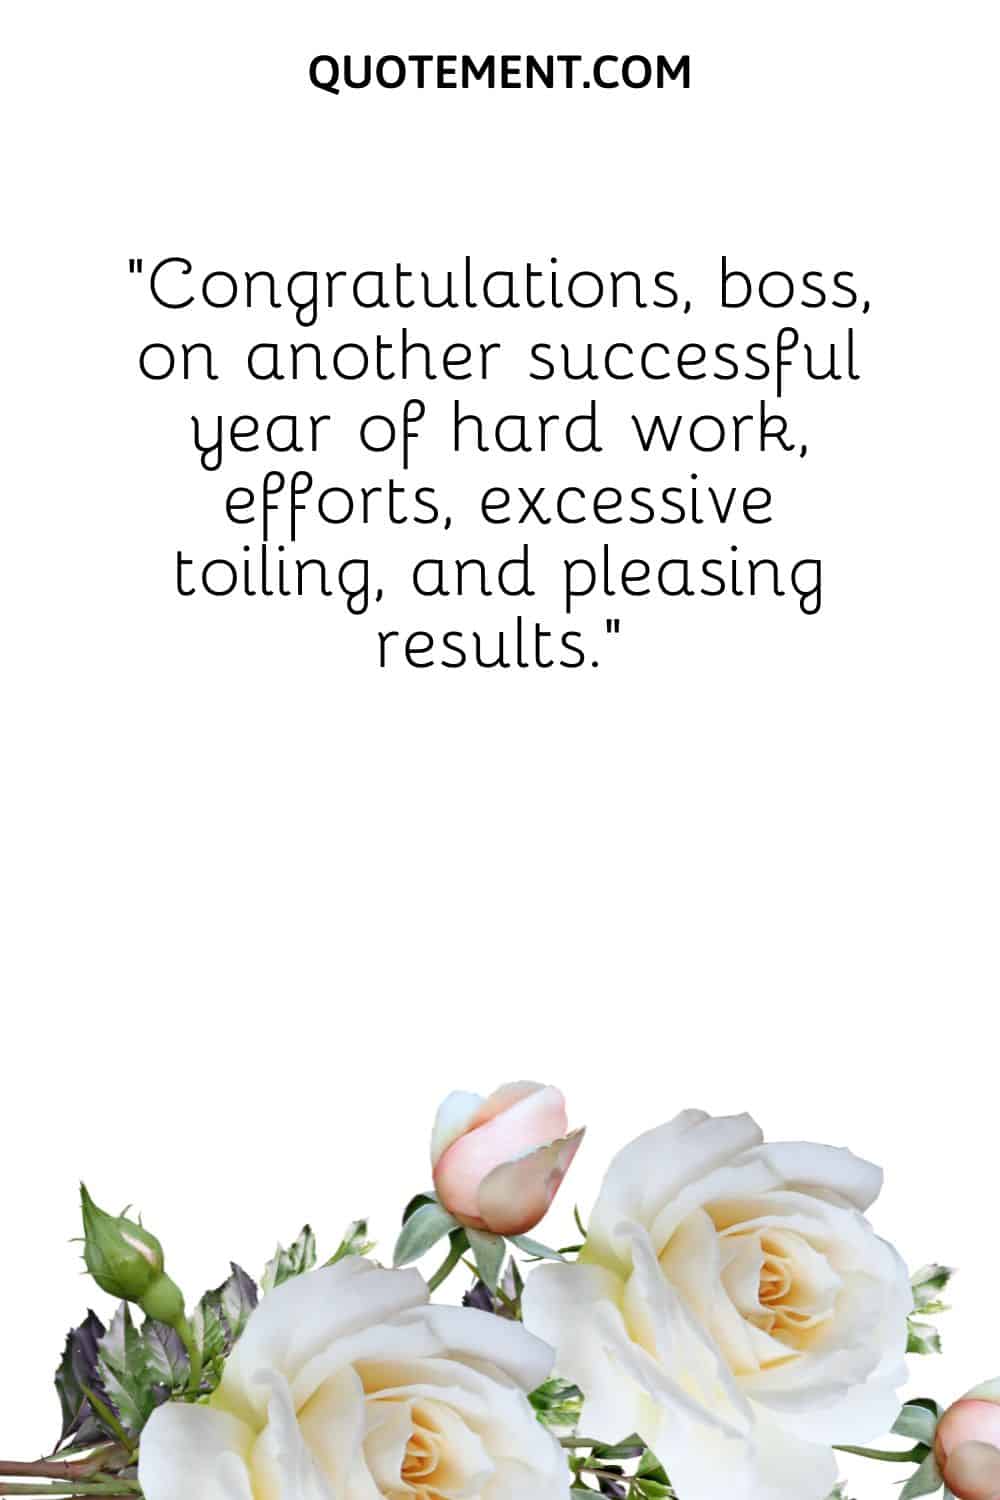 “Congratulations, boss, on another successful year of hard work, efforts, excessive toiling, and pleasing results.”